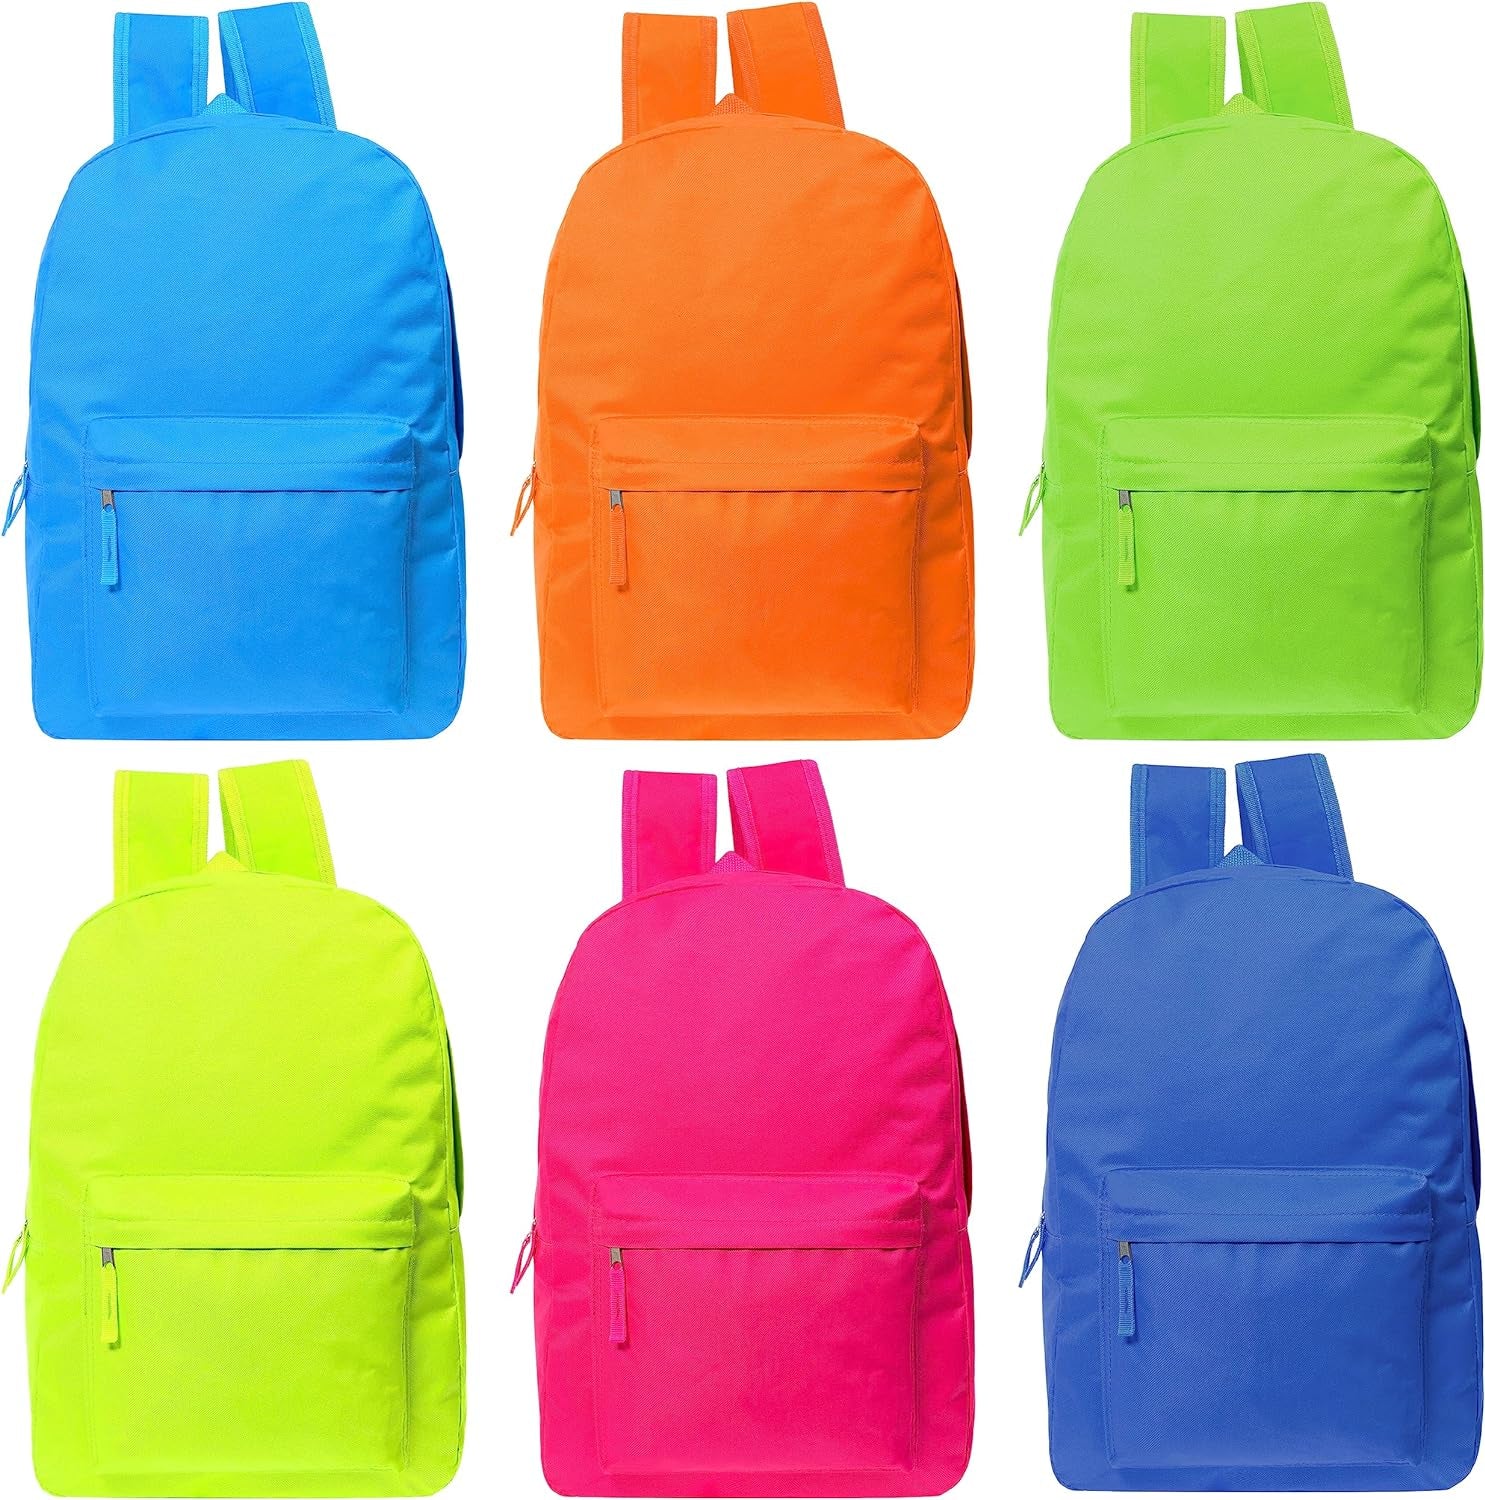 24-Pack 17" School Backpacks for Kids - Backpacks in Bulk for Elementary, Middle, and High School Students, 12 Assorted Colors